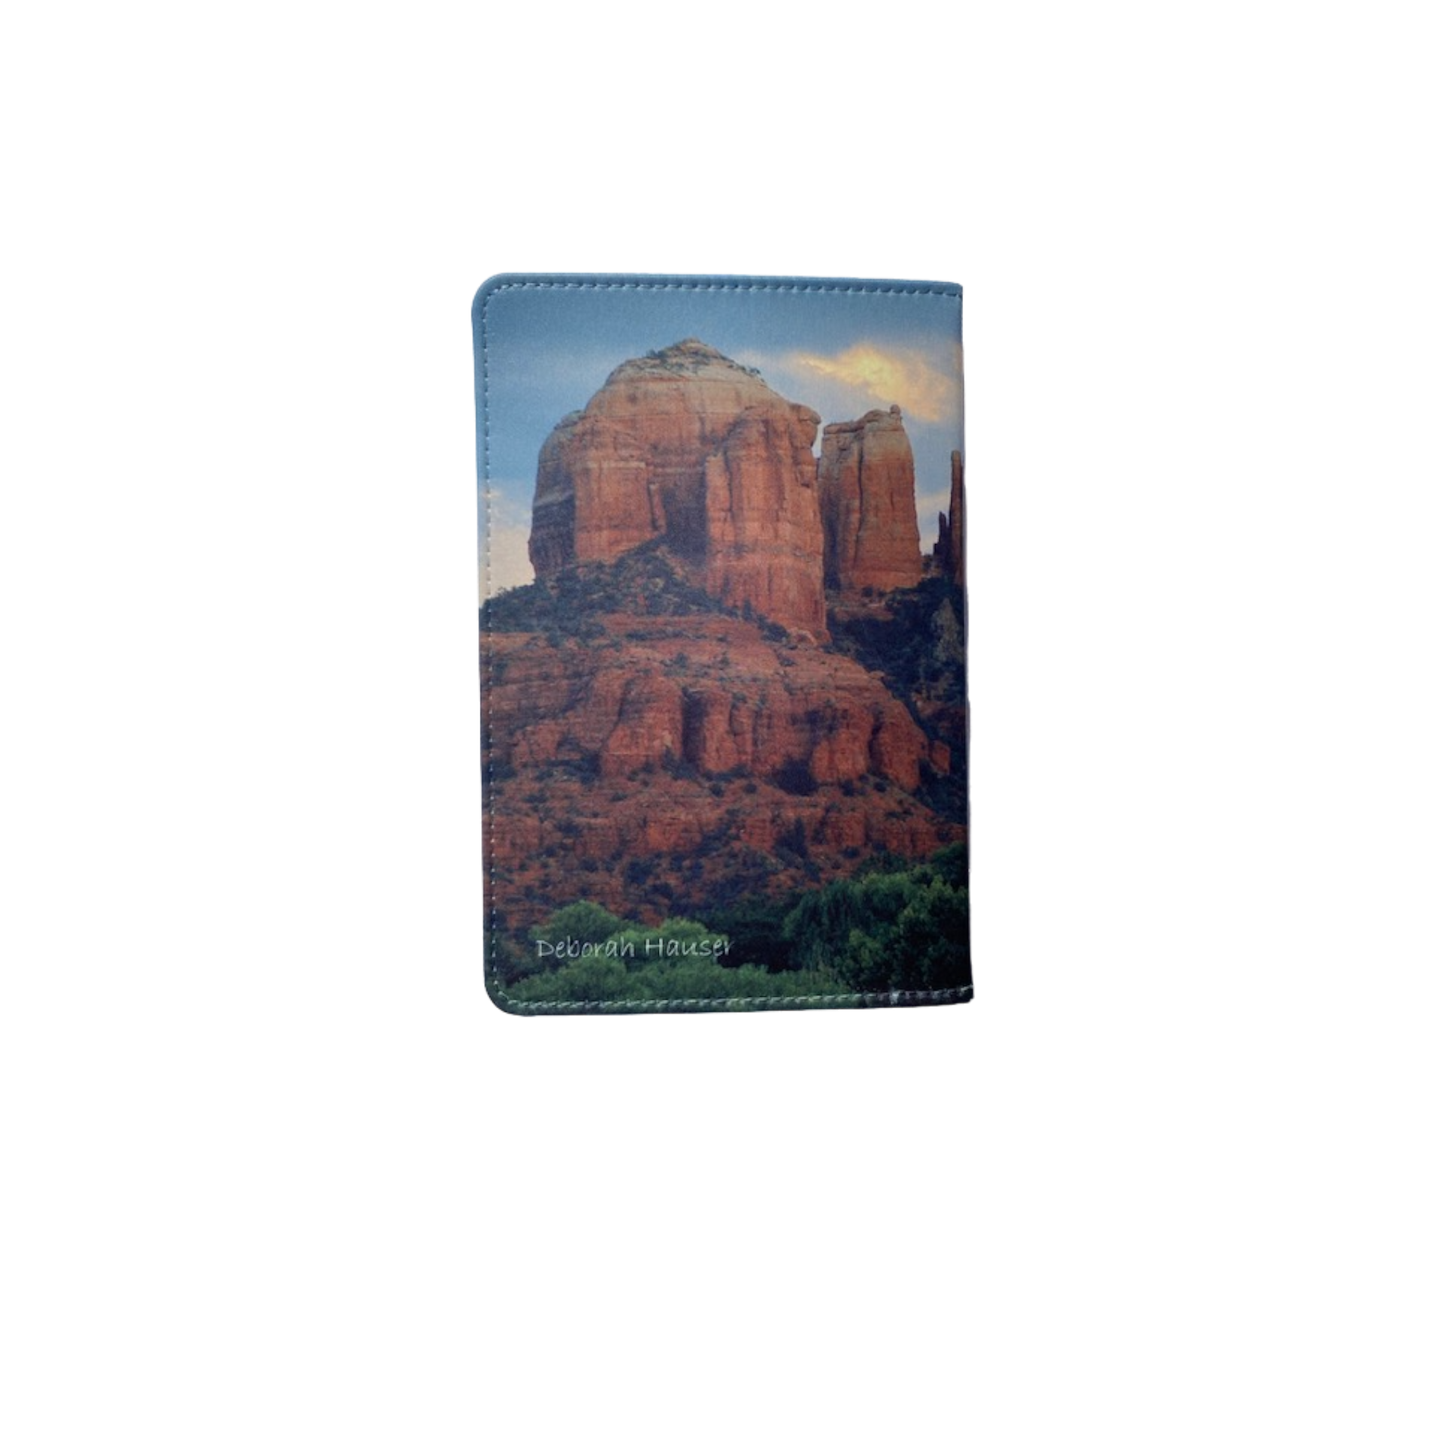 Journal- Sedona is Calling, Cathedral Rock up close, Leatherette Travel Journal